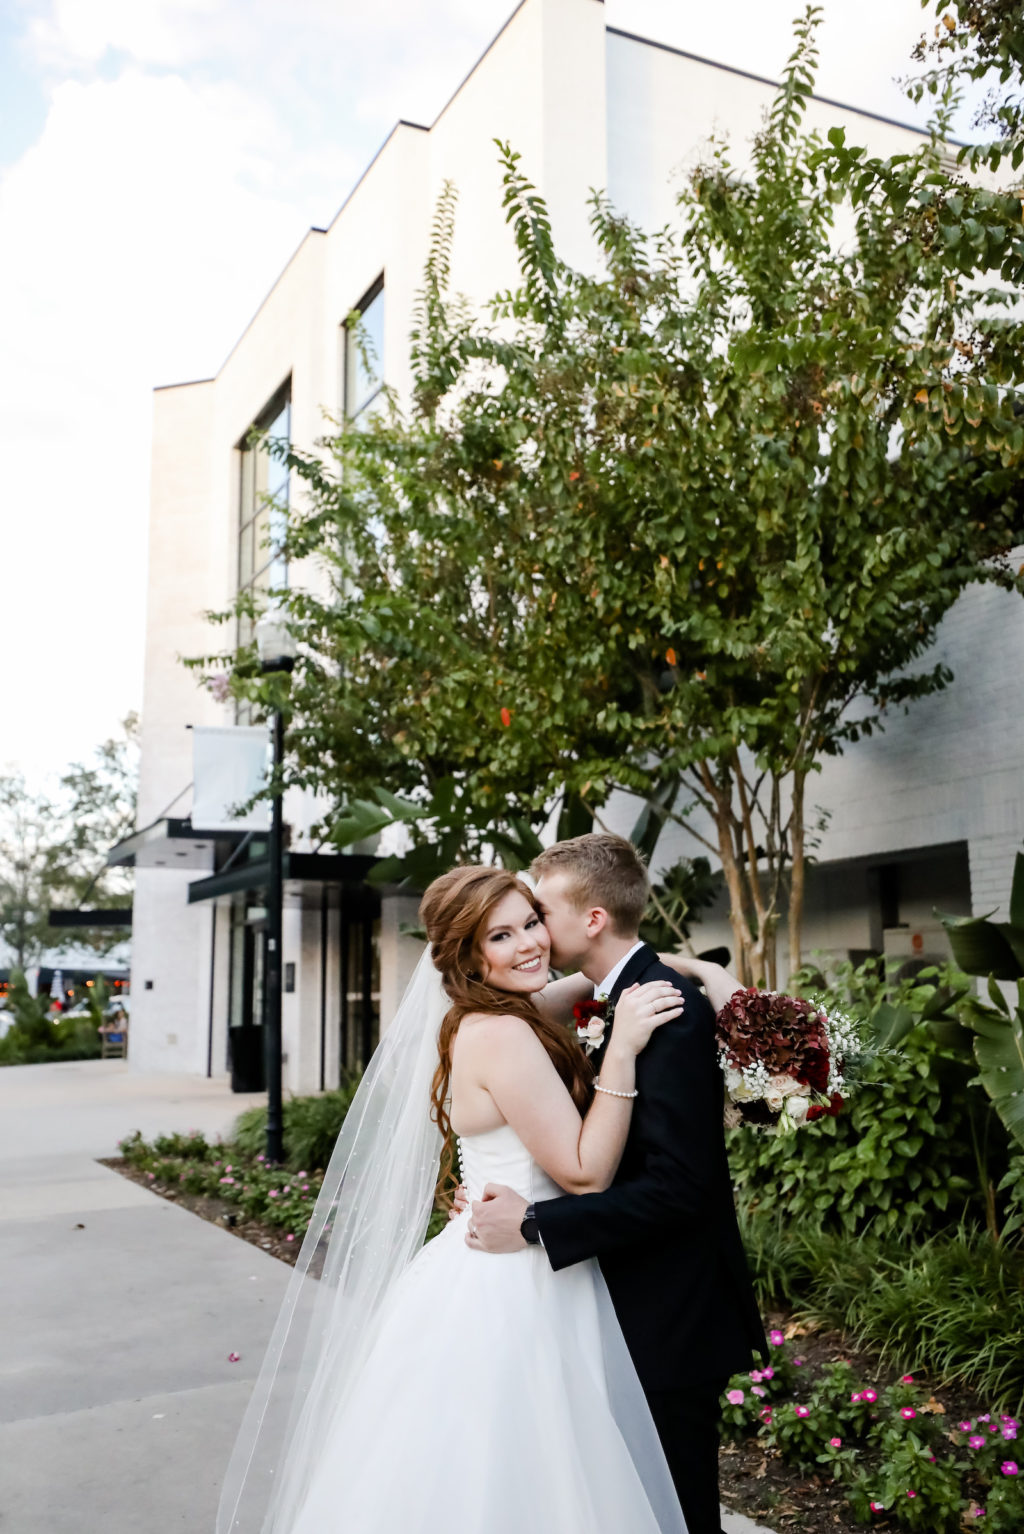 Bride and Groom Portrait at Tampa Wedding Venue Hyde House | Groom Wearing Classic Black Suit Tux | Bride Wearing Organza Sweetheart Neckline Sincerity Bridal Gown Wedding Dress with Long Pearl Studded Cathedral Veil | Bridal Wedding Bouquet with Burgundy and White Hydrangea, Red Carnations, White Roses, Baby's Breath and Greenery